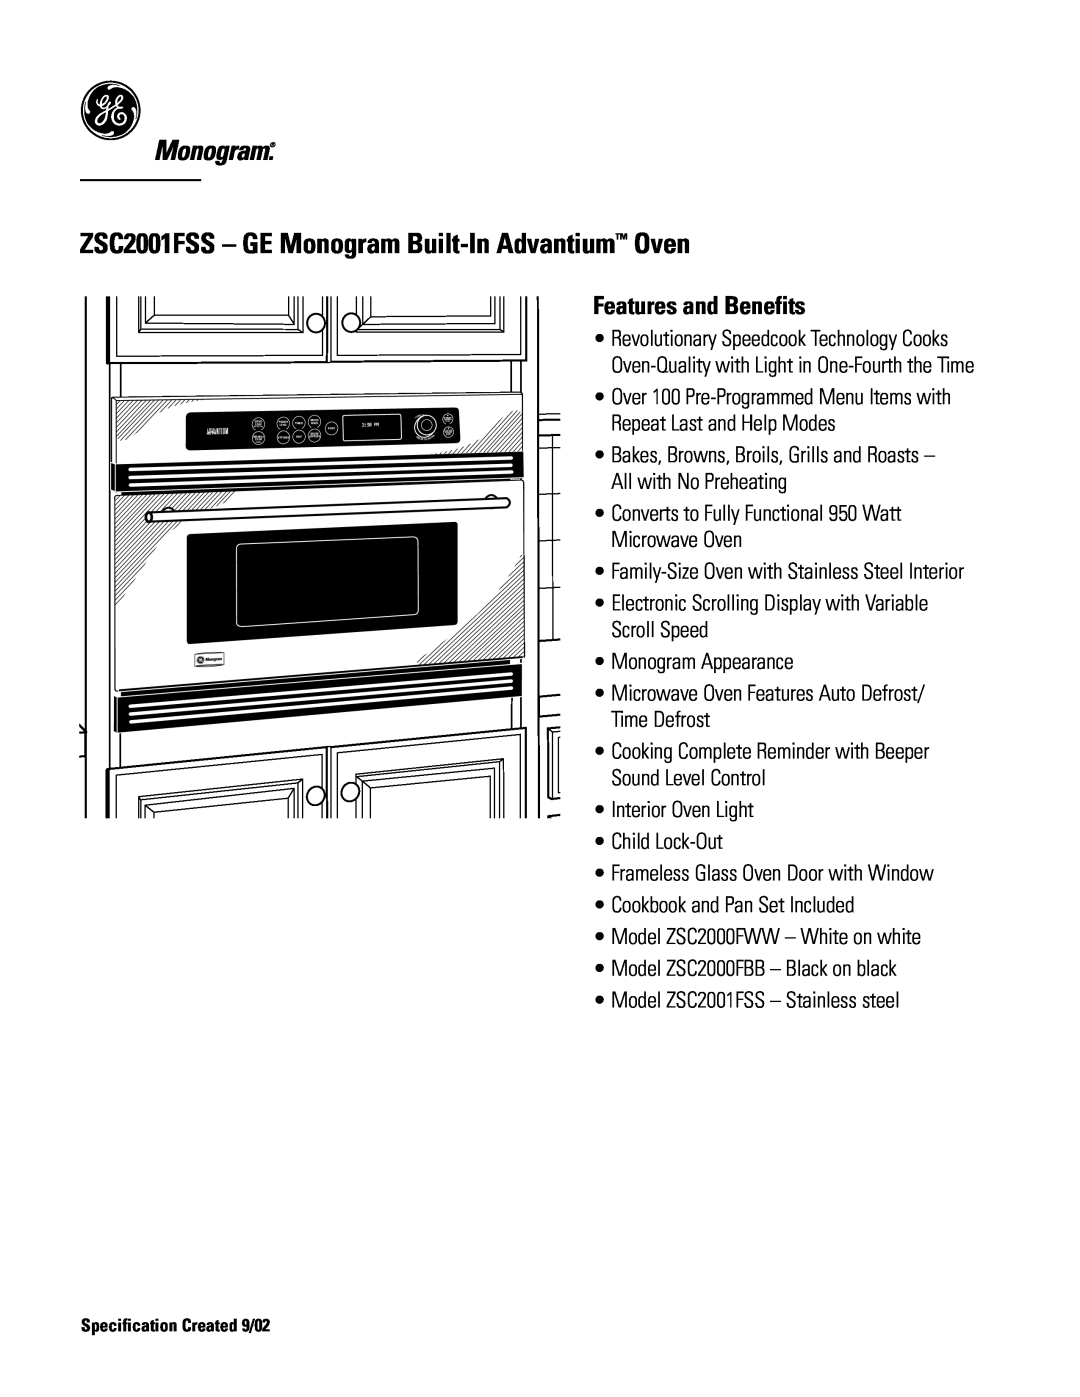 GE Monogram dimensions ZSC2001FSS - GE Monogram Built-In Advantium Oven, Features and Benefits 